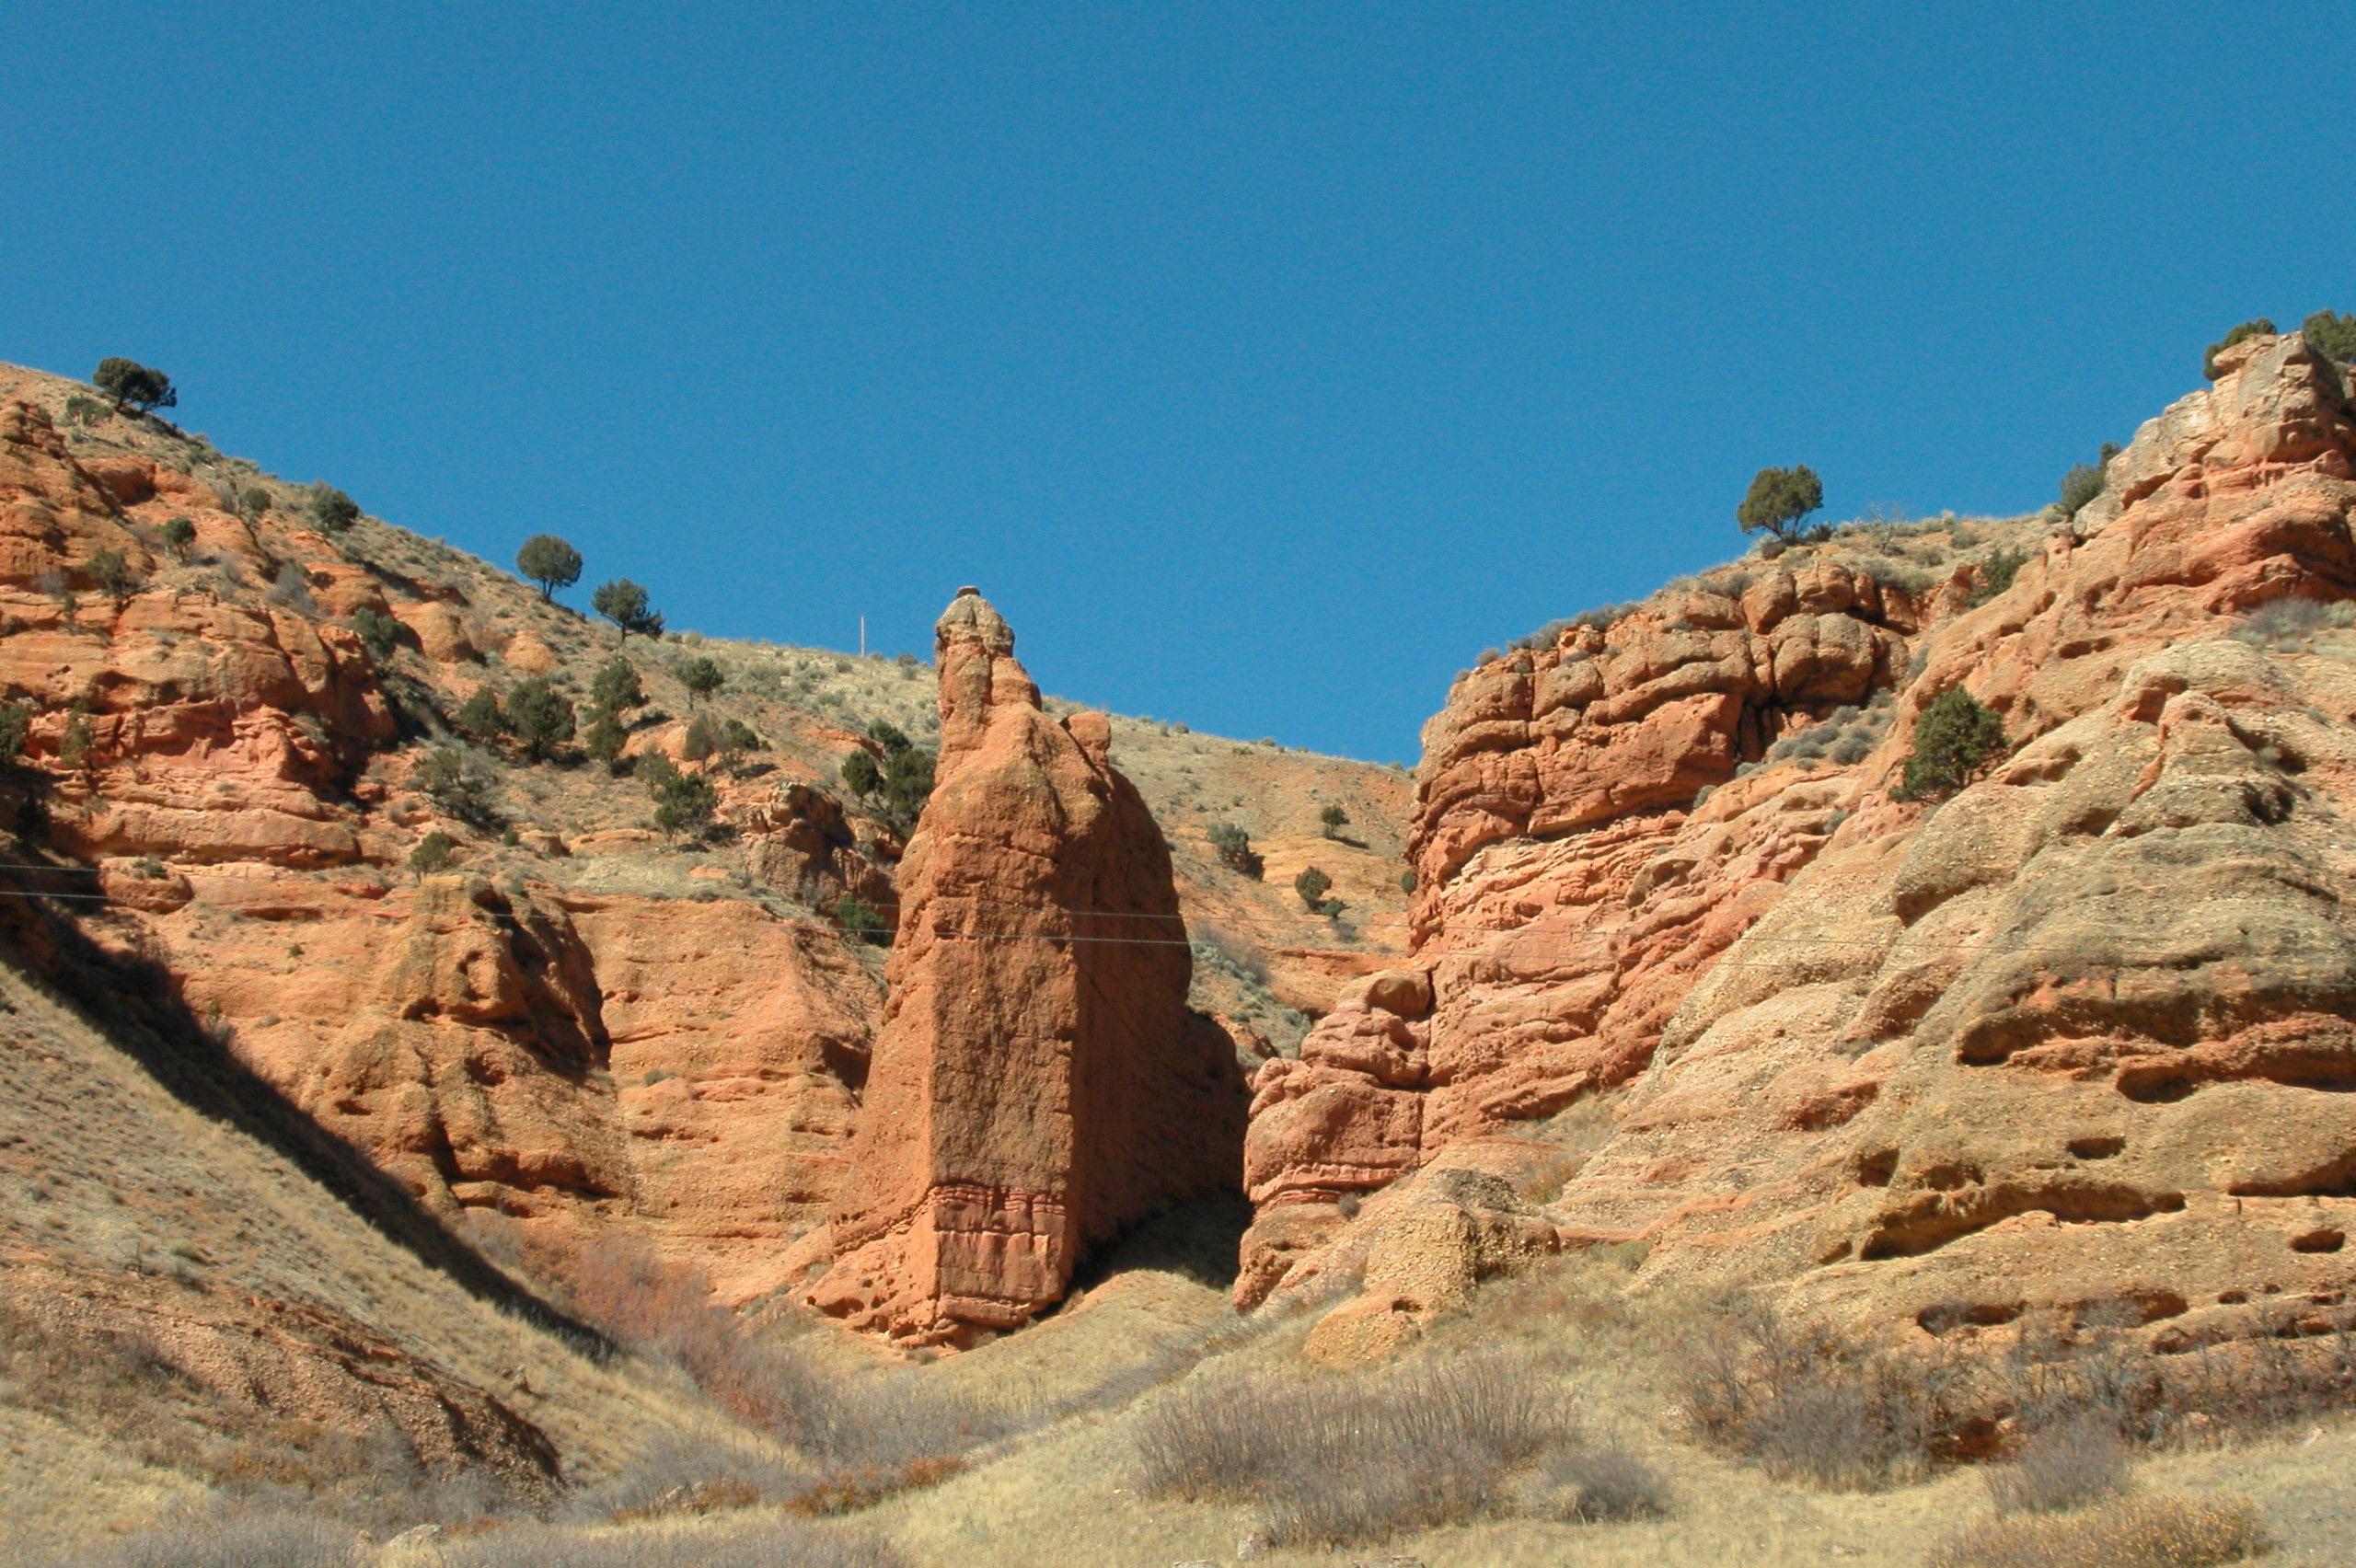 Red rock monolith in a rocky canyon